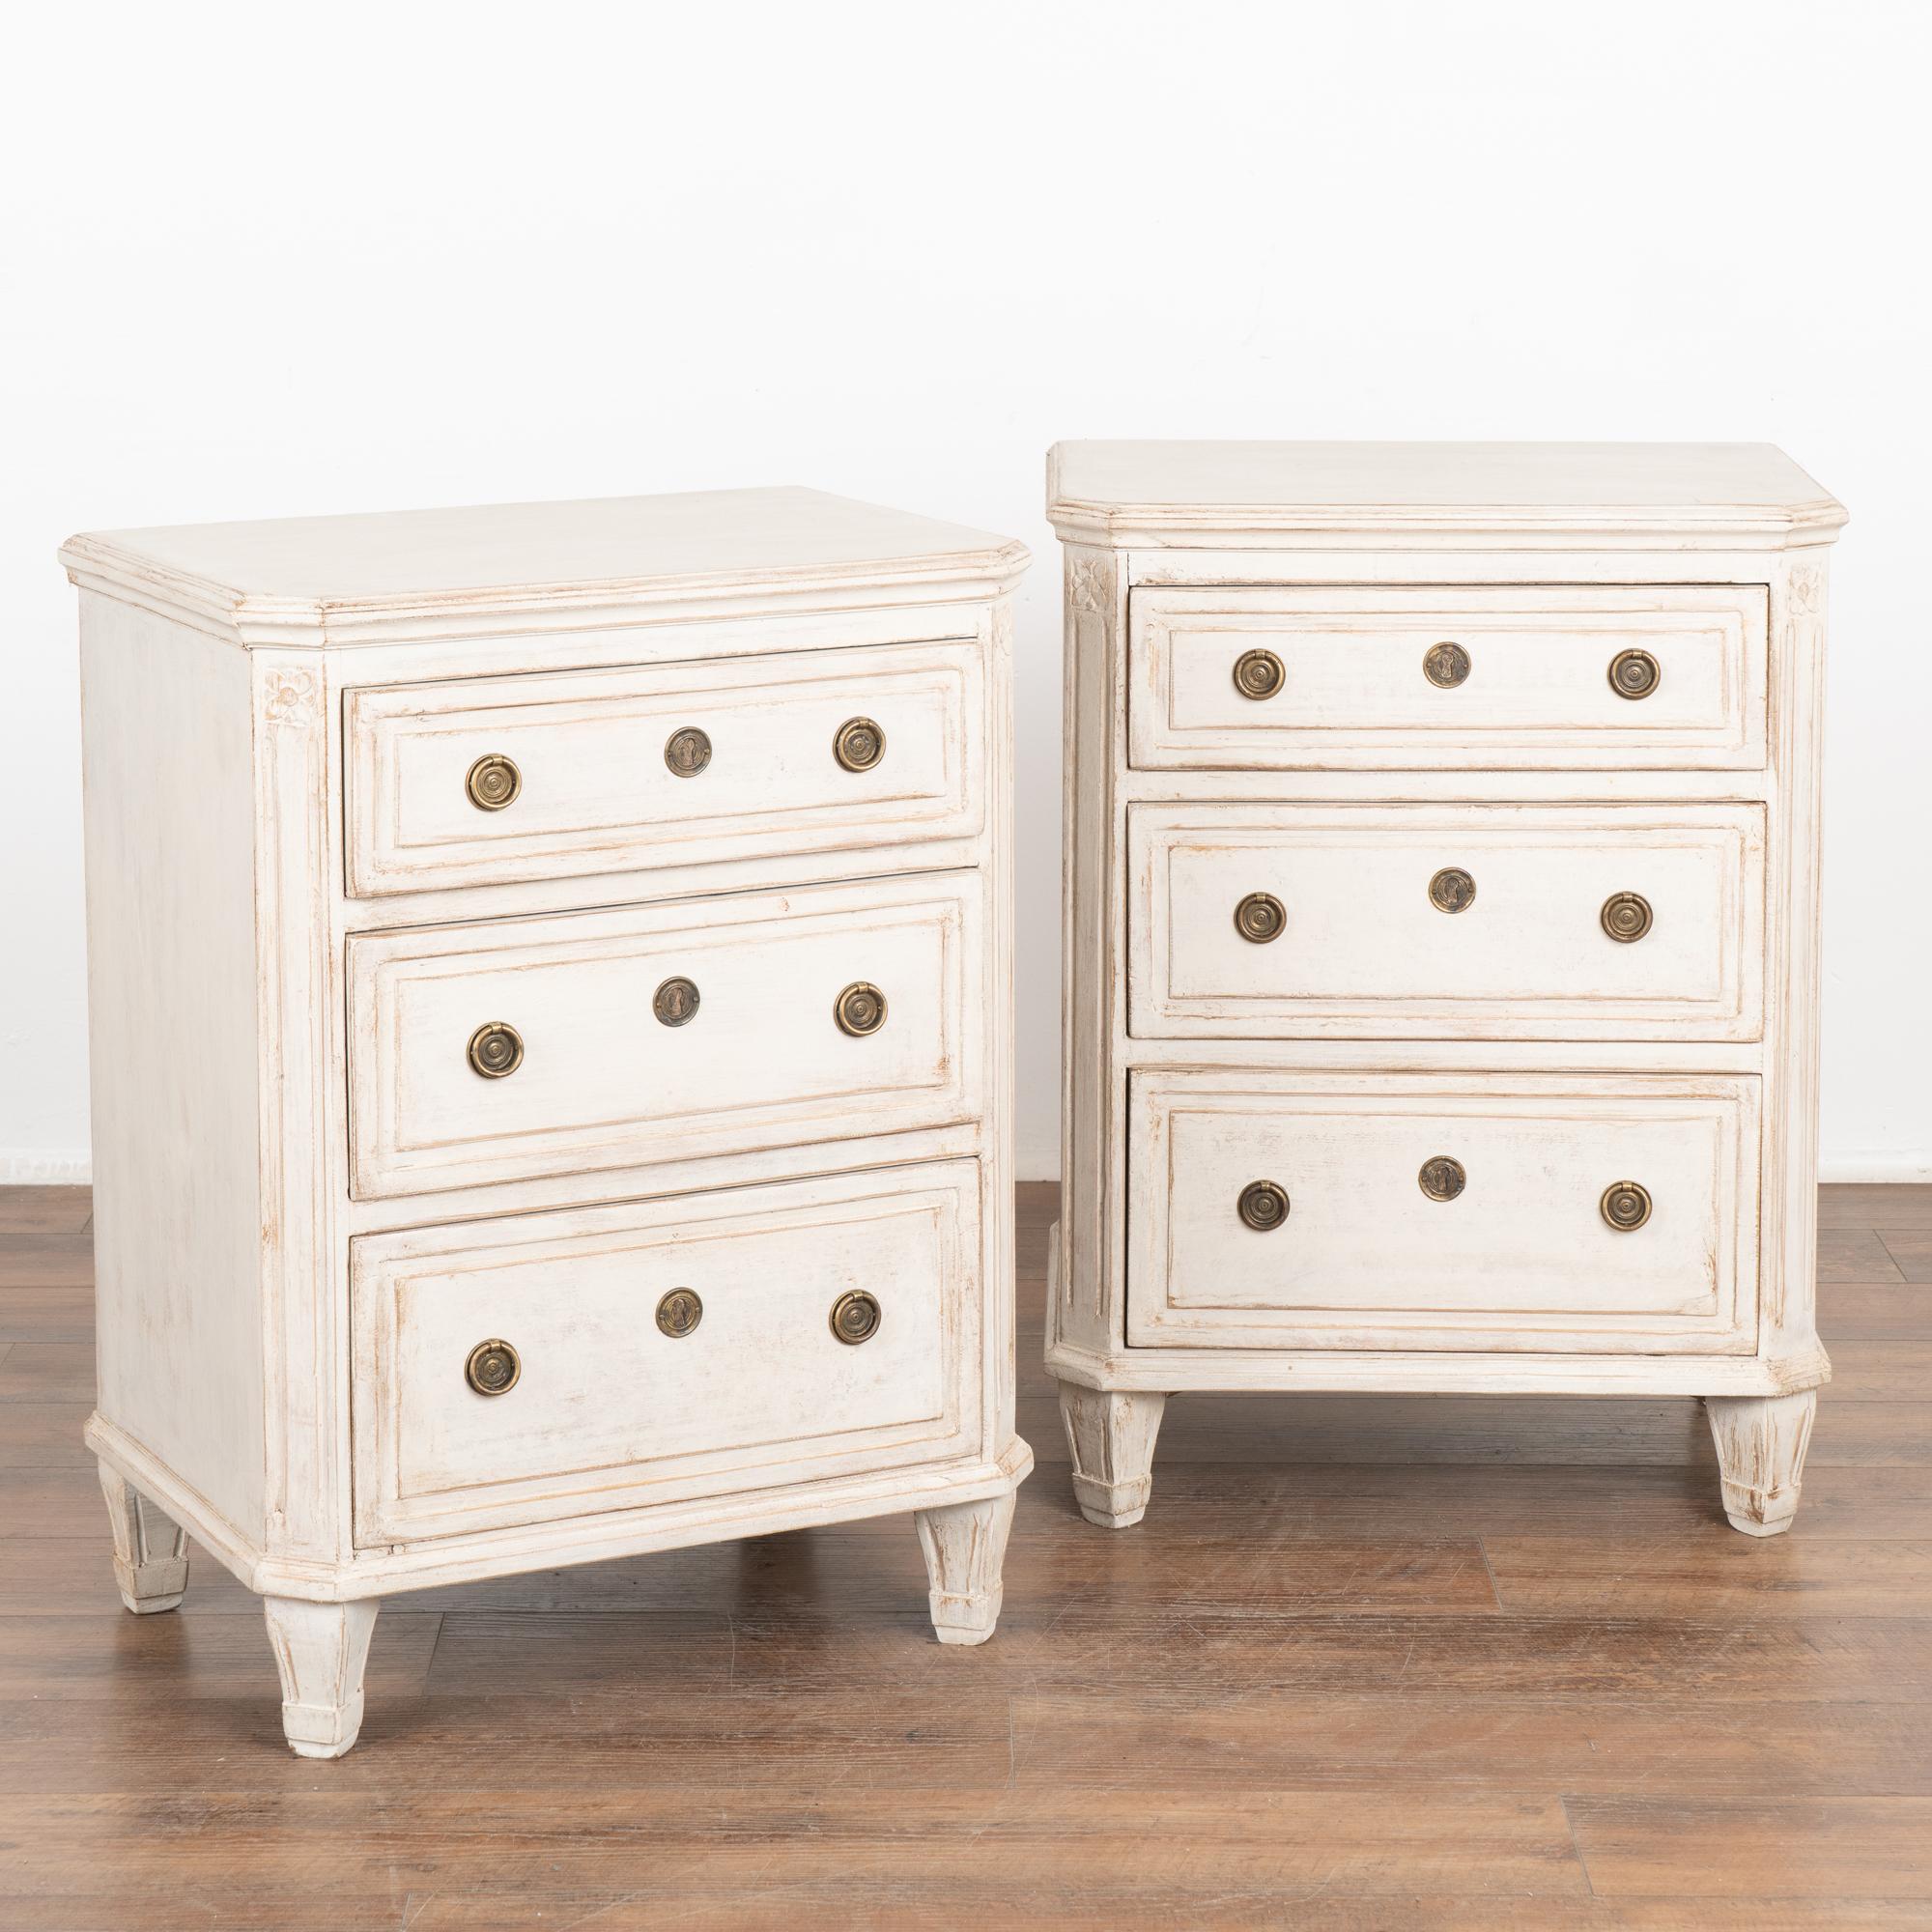 Pair, Gustavian style small pine chest of drawers with fluted canted sides and fluted tapered feet perfect to use as nightstands or small side tables. 
The three drawers each have two brass pulls to open.
The newer, professionally applied white